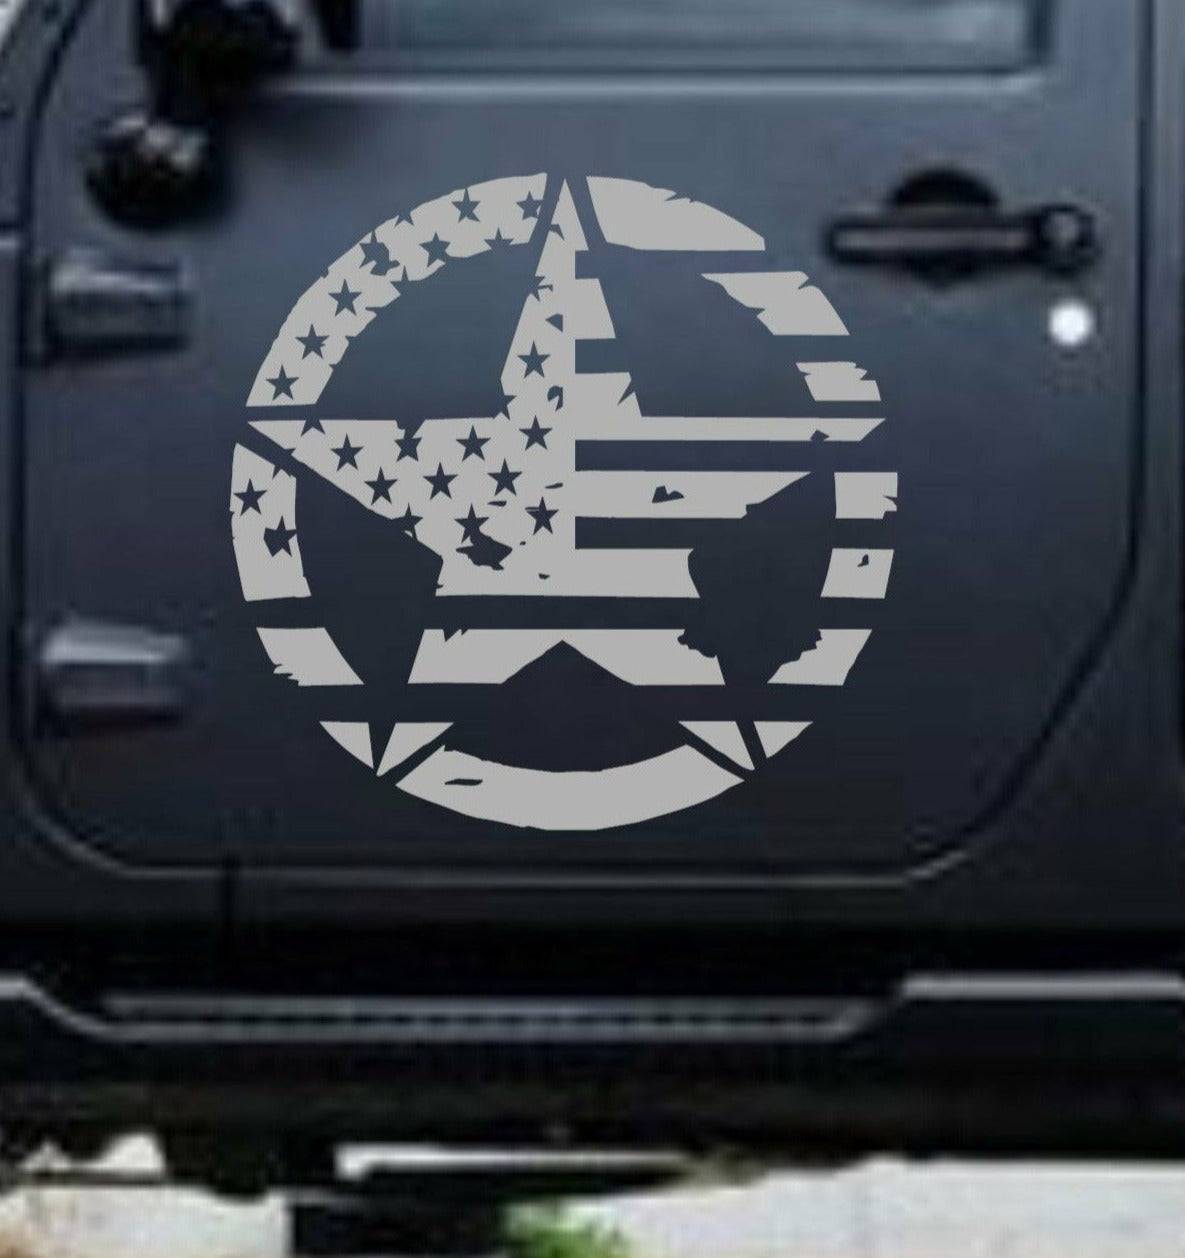 American Flag Military Star Decals for Trucks, Jeeps, Cars, SUVs | Sizes Available